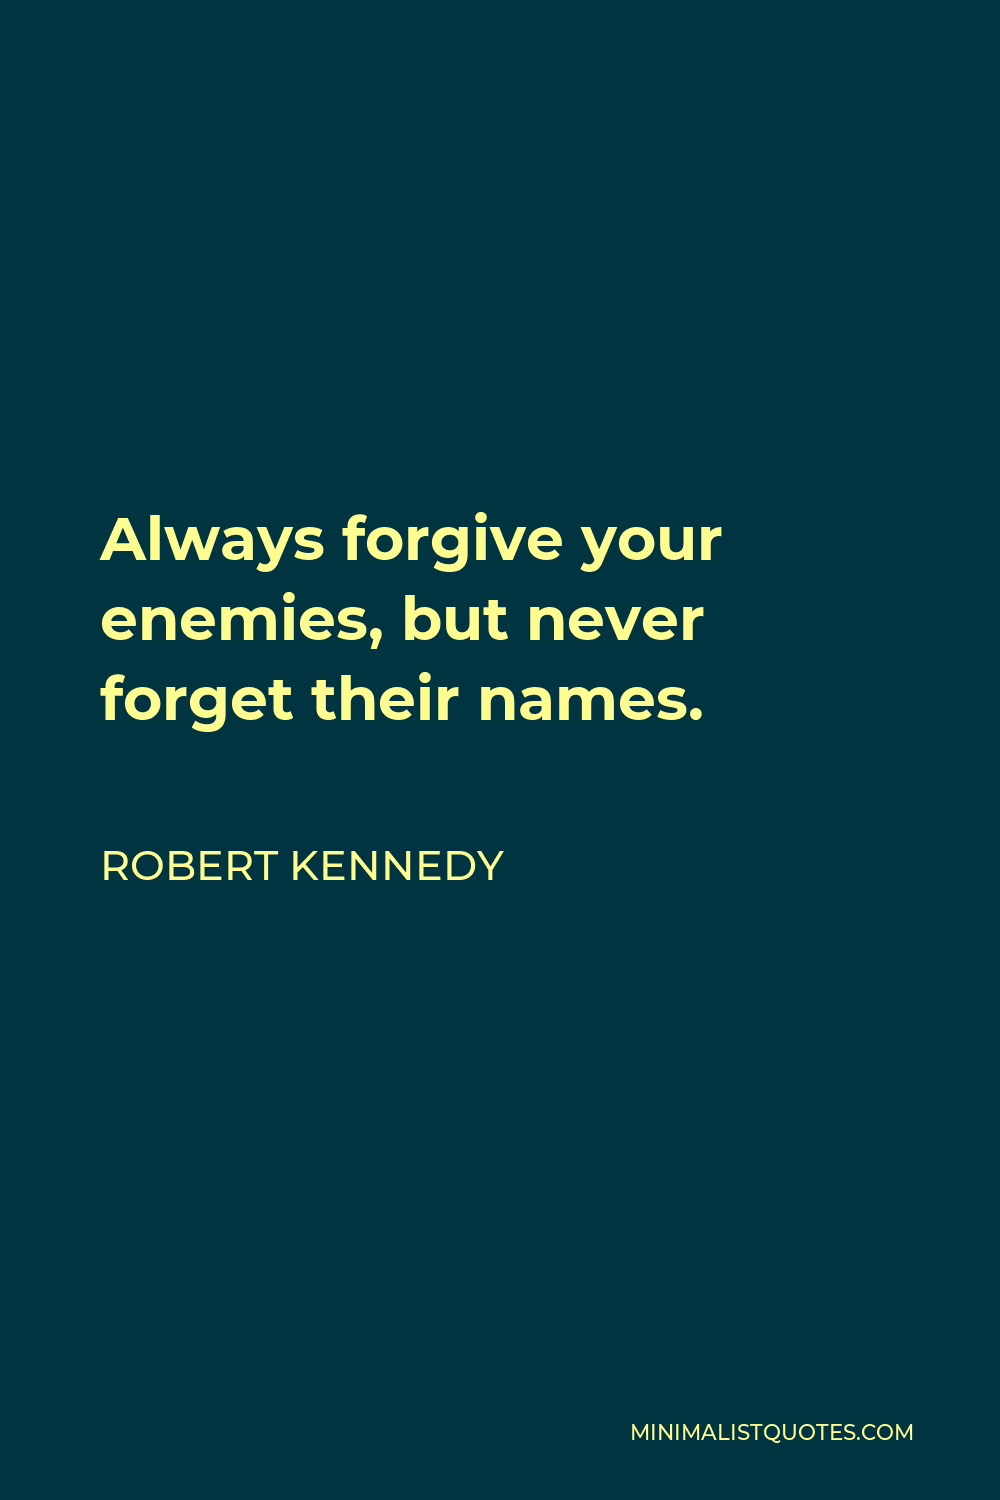 Robert Kennedy Quote - Always forgive your enemies, but never forget their names.